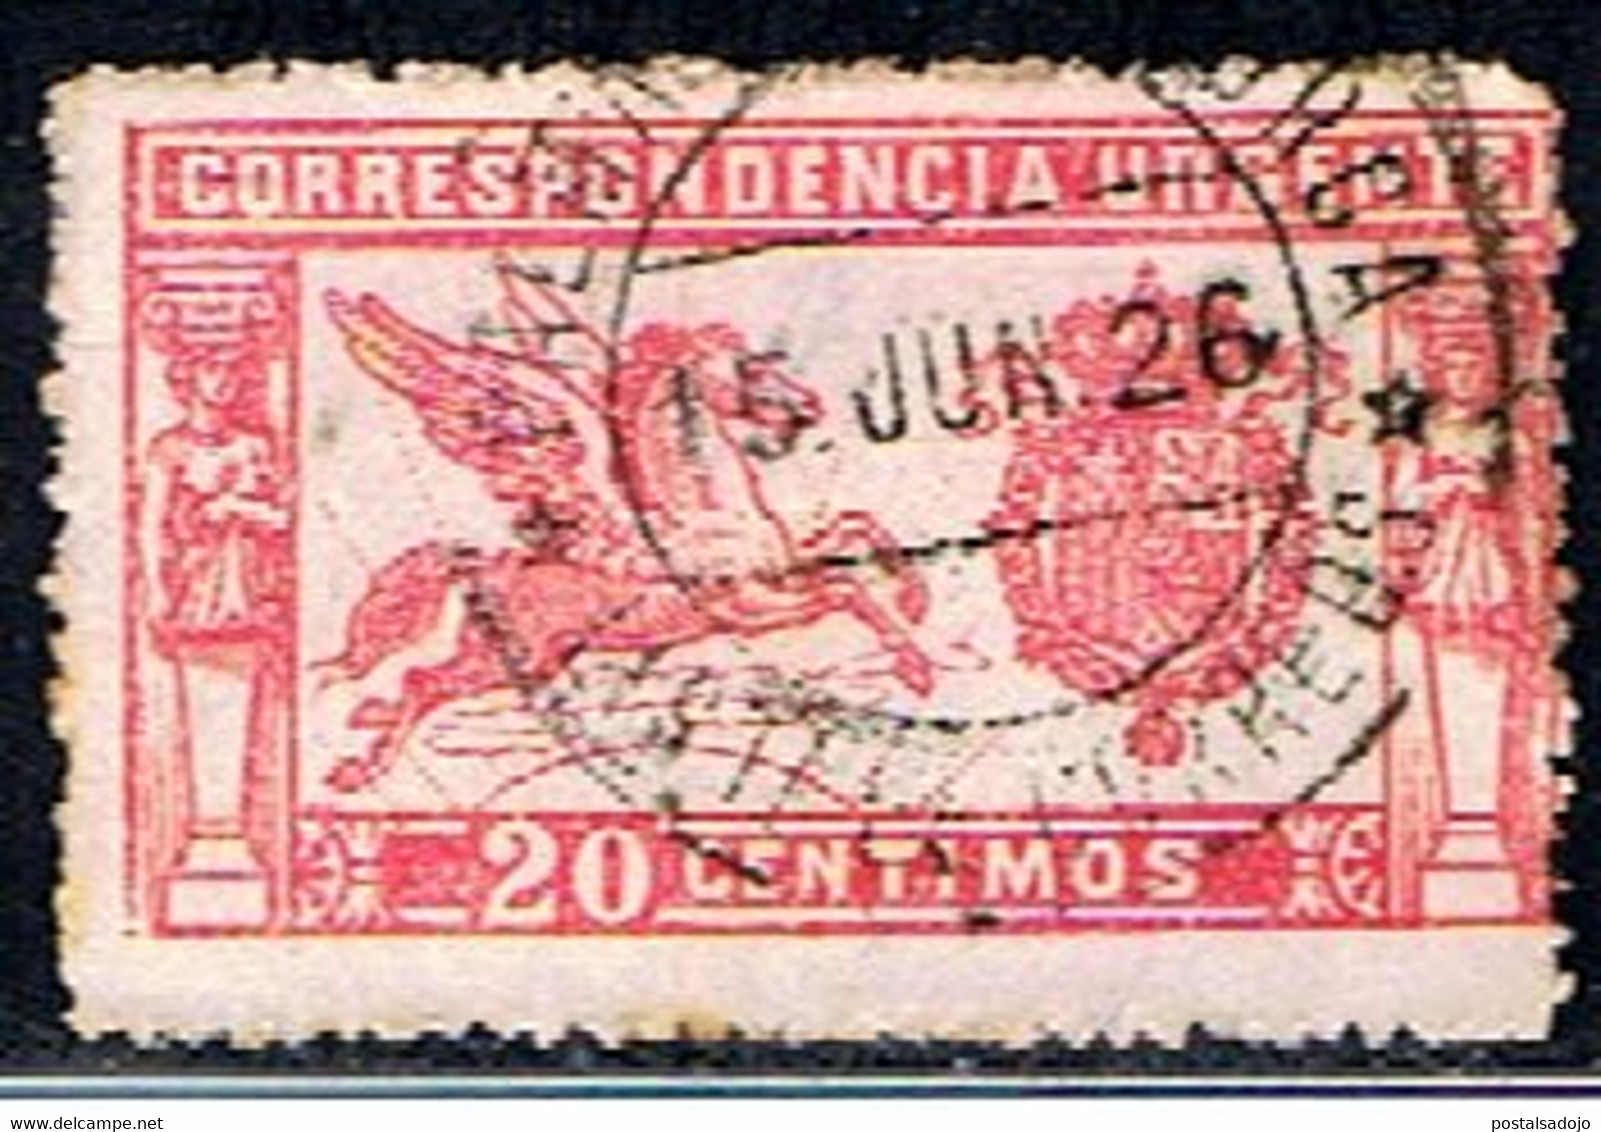 8ESPAGNE 344 // YVERT 1 // EDIFIL 256 //1905 - Special Delivery